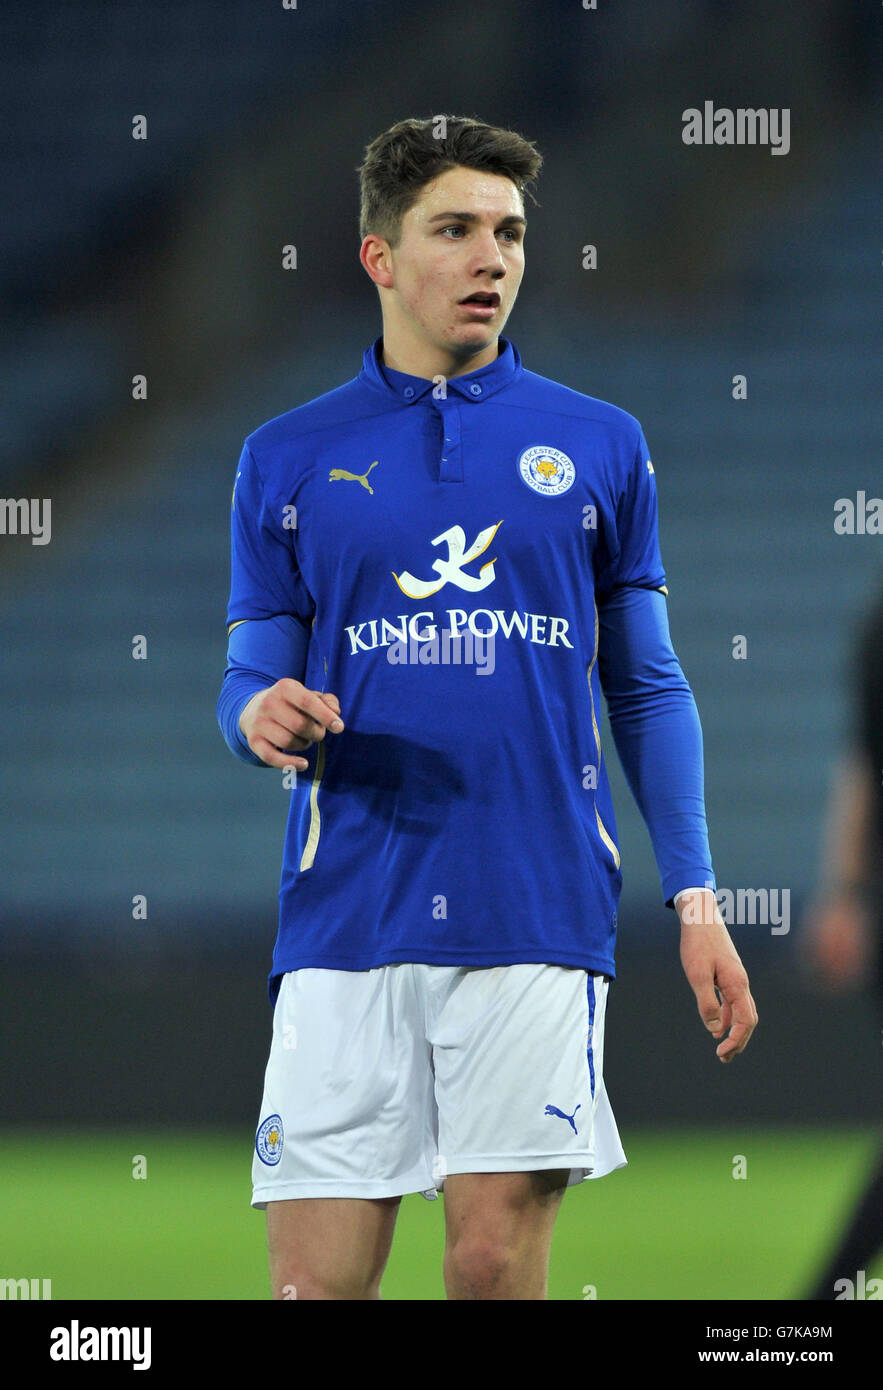 Soccer - FA Youth Cup - Fourth Round - Leicester City v Chesterfield - King Power Stadium. Leicester City's Matty Miles Stock Photo